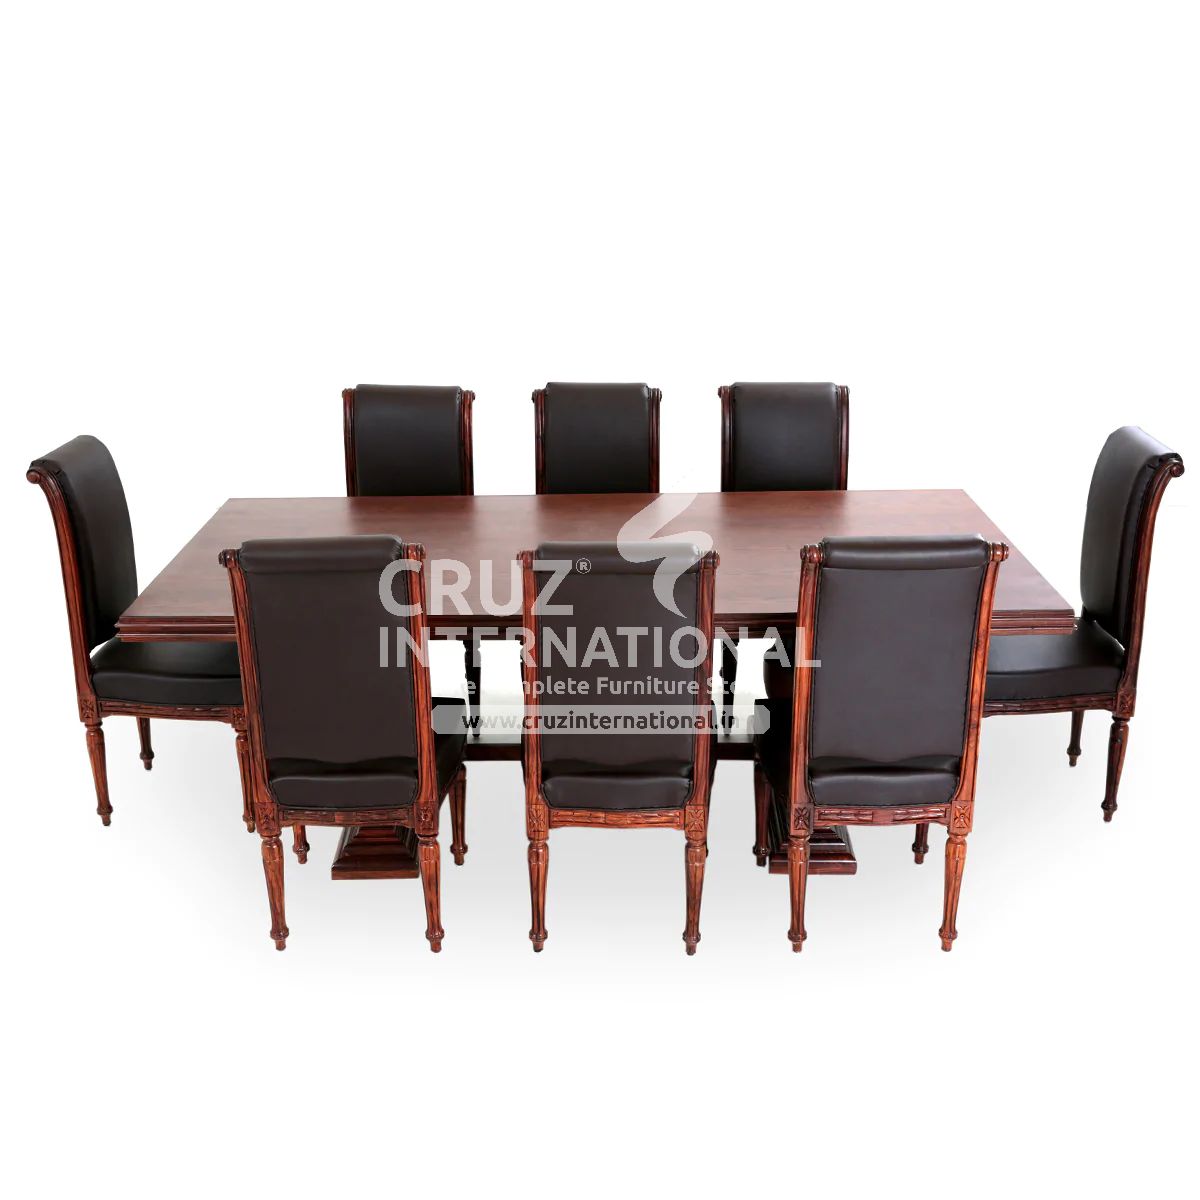 Classic James Benito Wooden Dinning Table | 8 Chairs + 1 Table CRUZ INTERNATIONAL